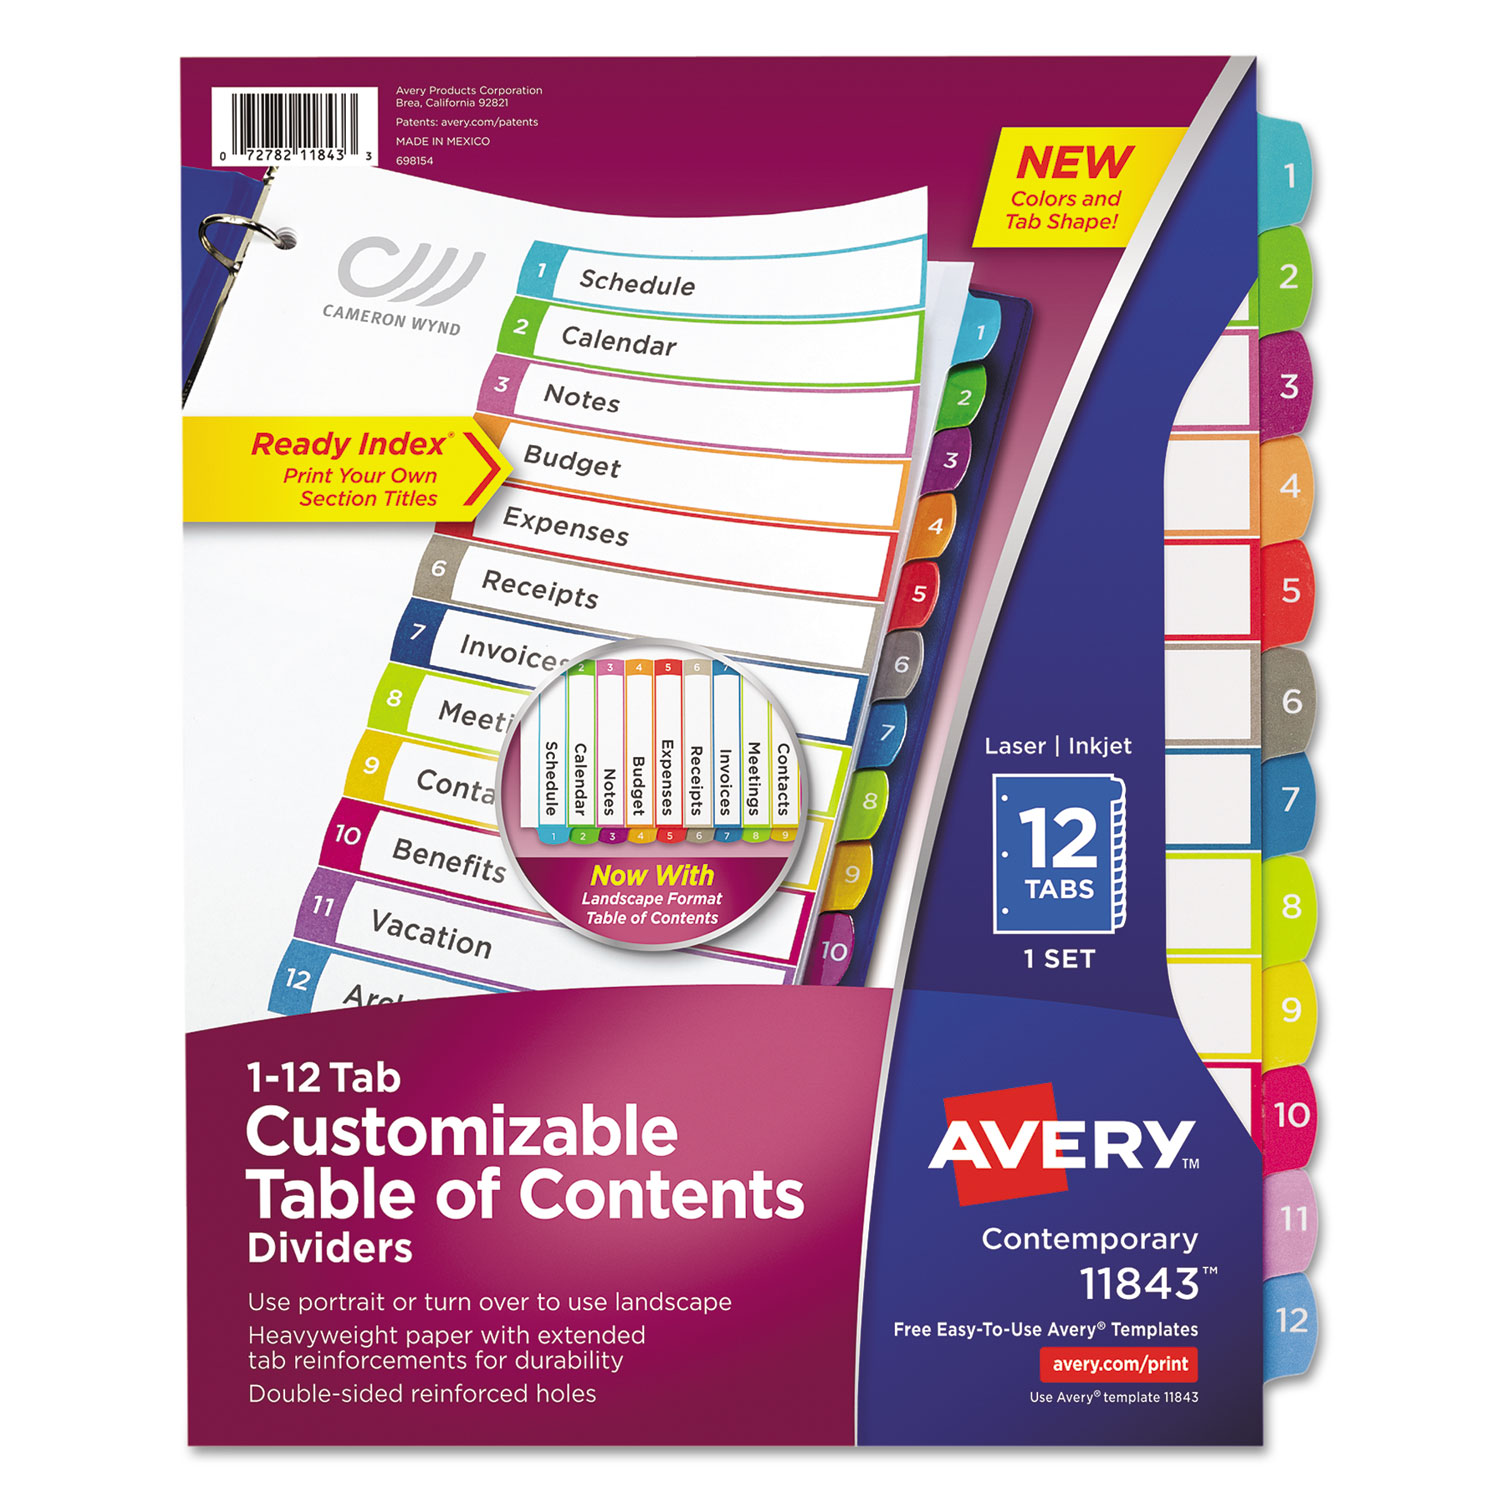 Customizable TOC Ready Index Multicolor Tab Dividers, 12-Tab, 1 to 12, 11 x 8.5, White, Contemporary Color Tabs, 1 Set